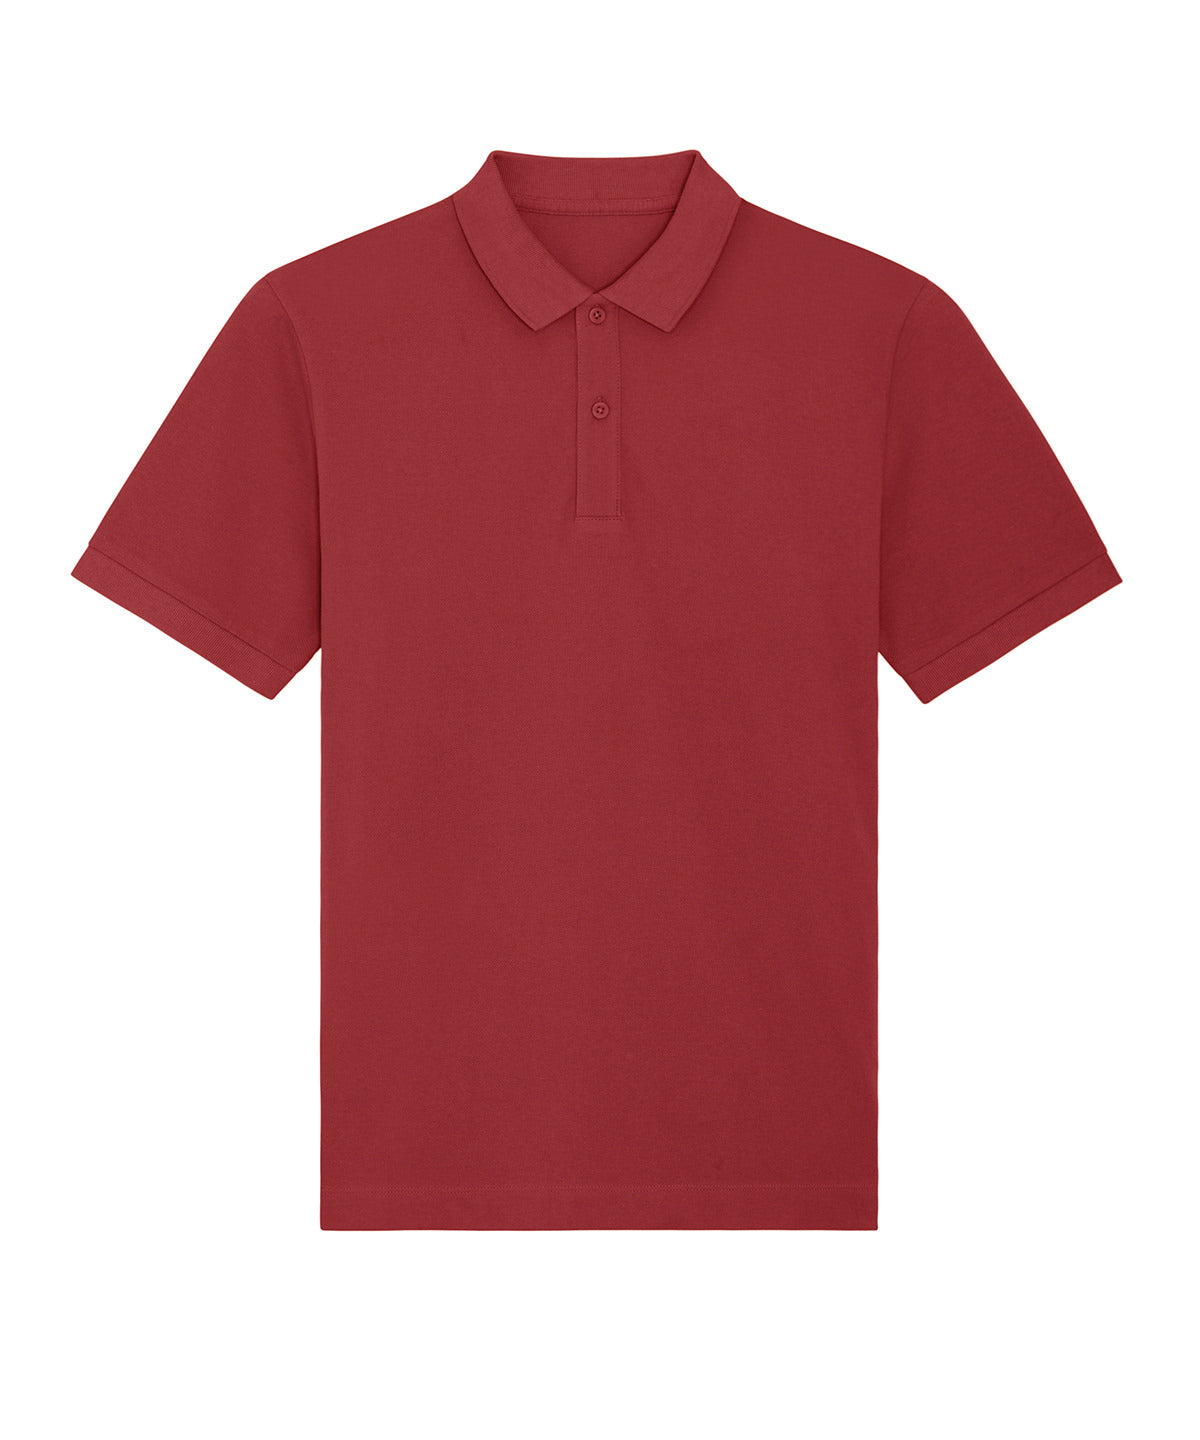 Stanley/Stella Prepster Unisex Short Sleeve Polo Red Earth